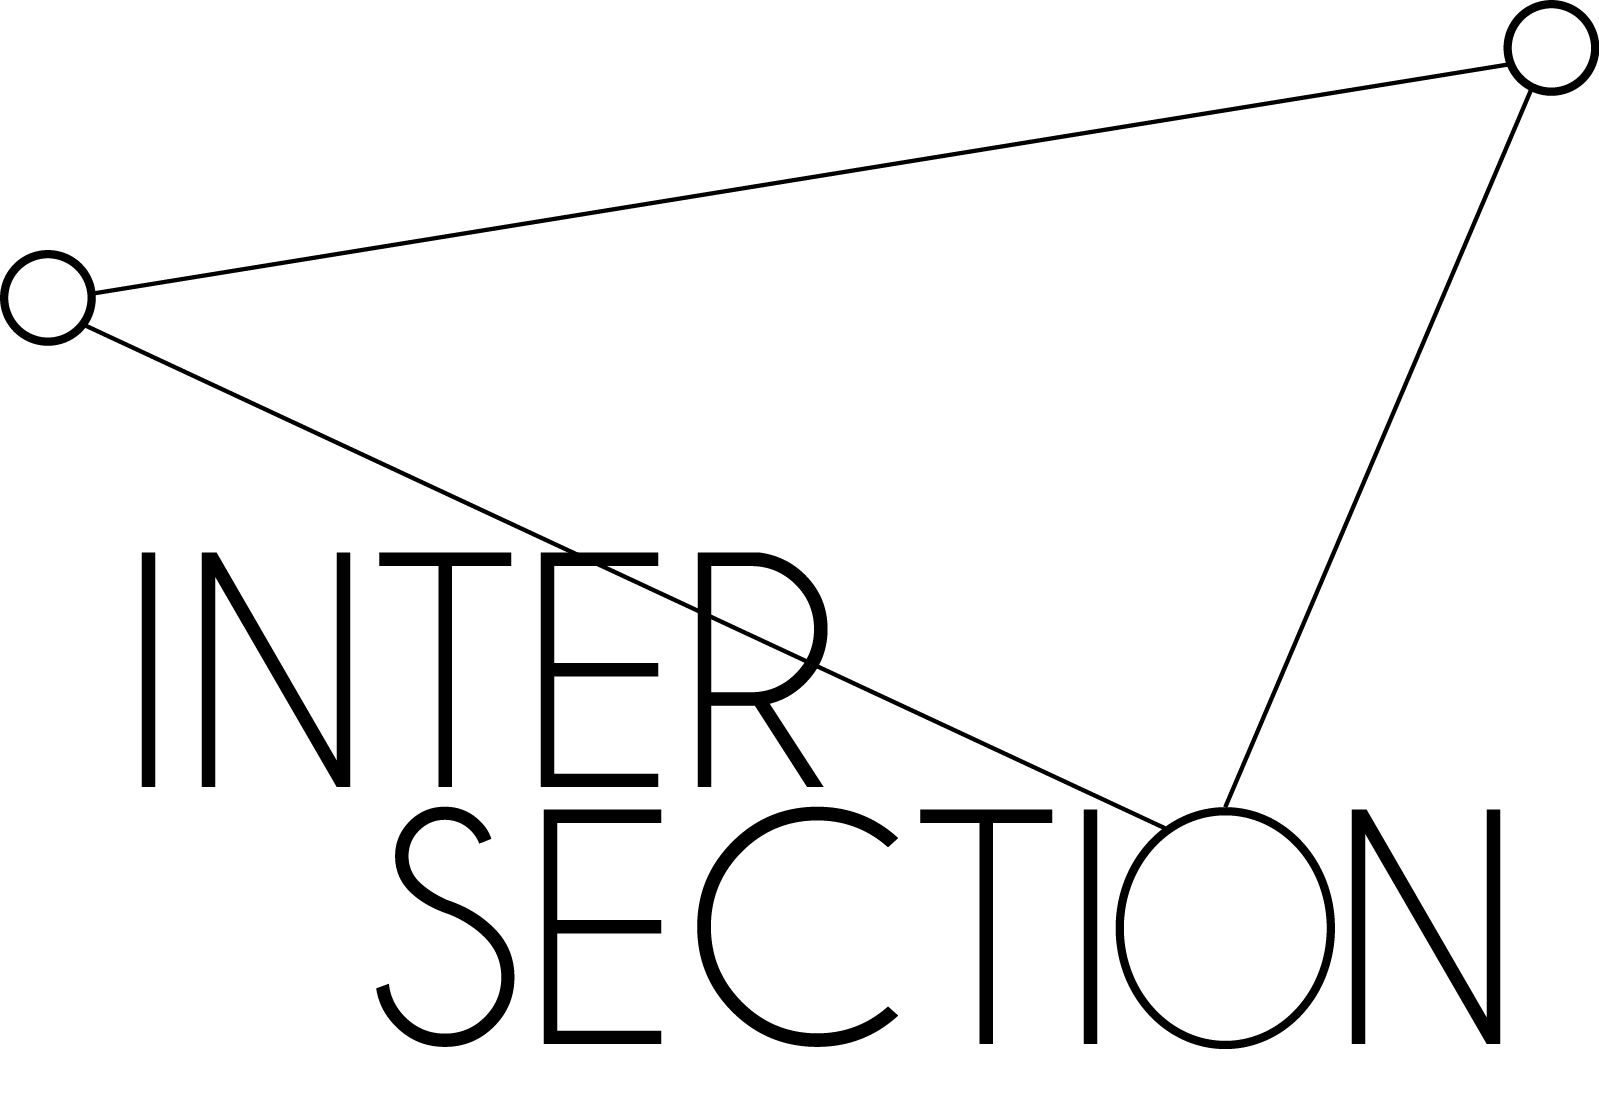 LOGO_Intersection exhibition.png